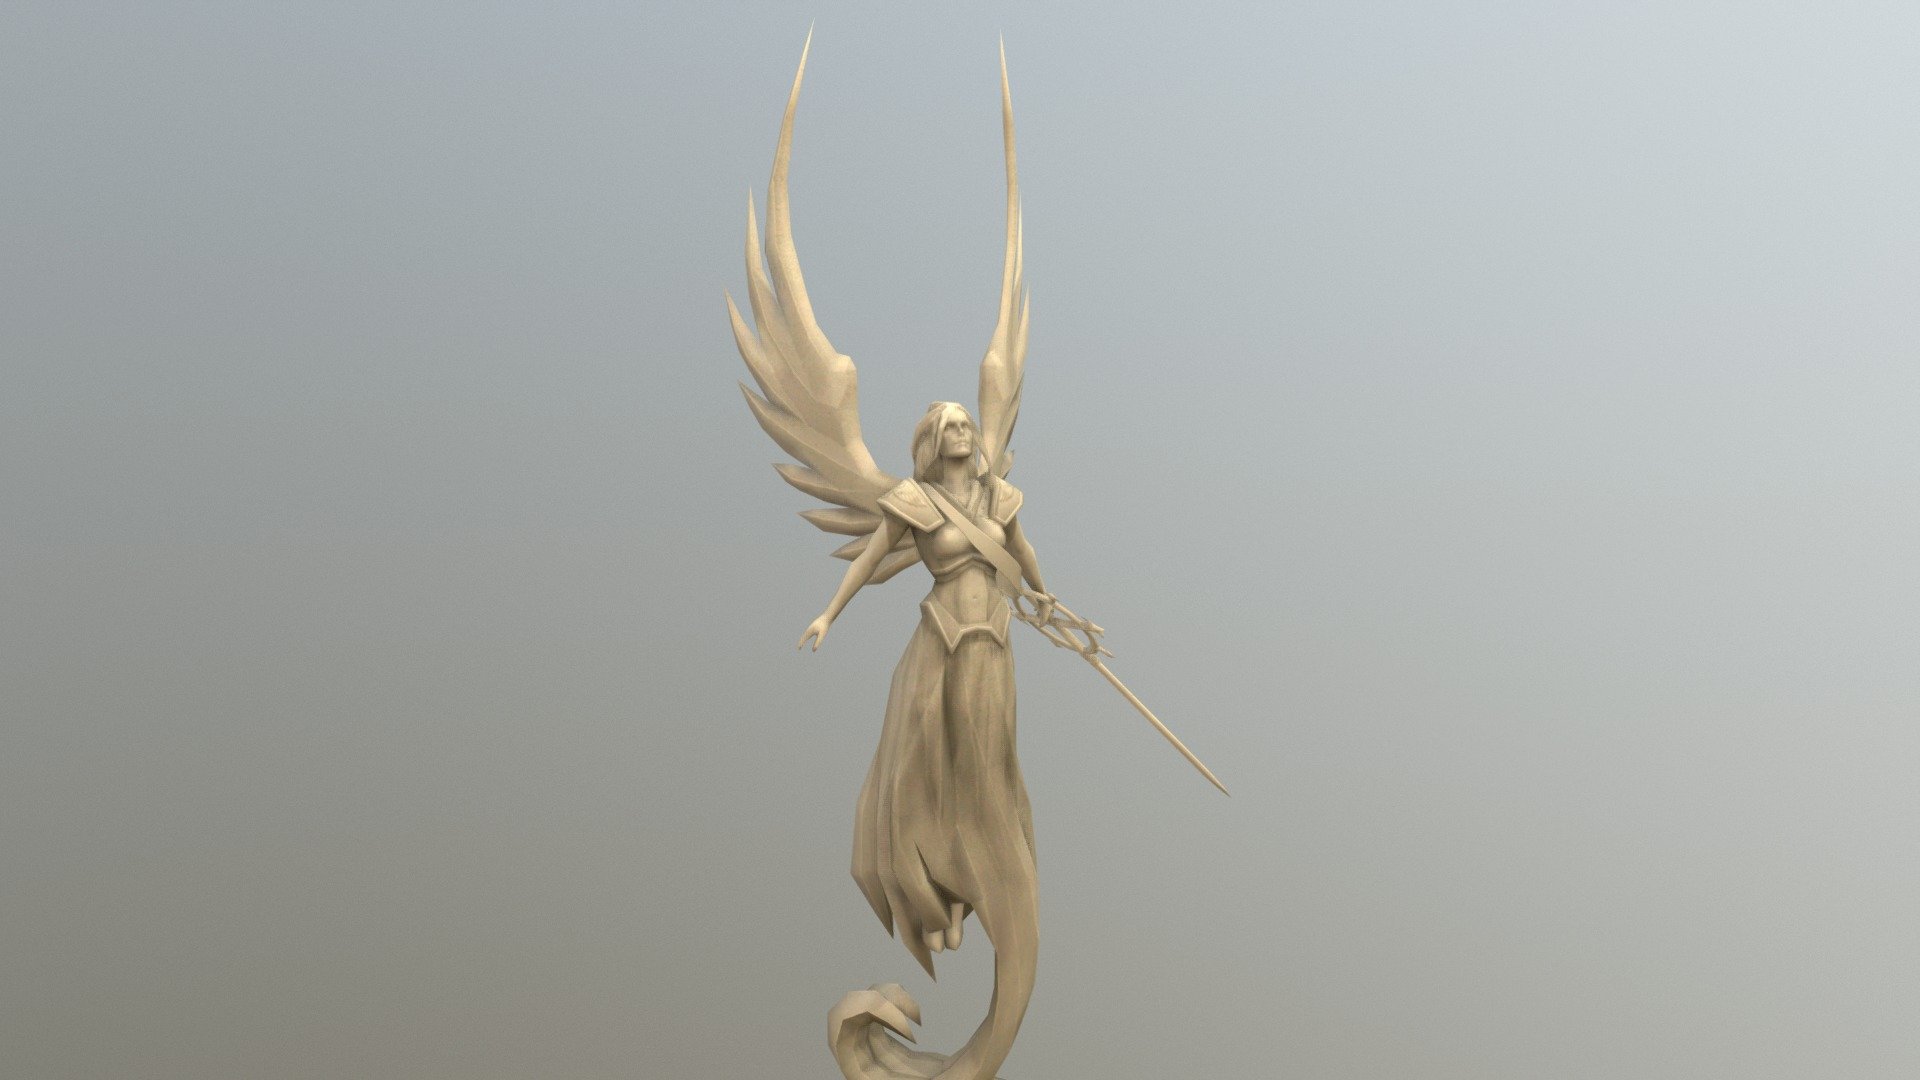 The model from Heroes of Might and Magic V game is derived with the help of Archangel v0.5 beta and modified with the help of Blender software.

Background sound is the remap of the remap of the Heroes of Might and Magic V game sound track.

Monument Asset for Cities: Skylines:

http://steamcommunity.com/sharedfiles/filedetails/?id=1226528009

http://steamcommunity.com/sharedfiles/filedetails/?id=1226529205 - The Altar of Light (Heroes of Might and Magic V) - Download Free 3D model by heu3becteh 3d model